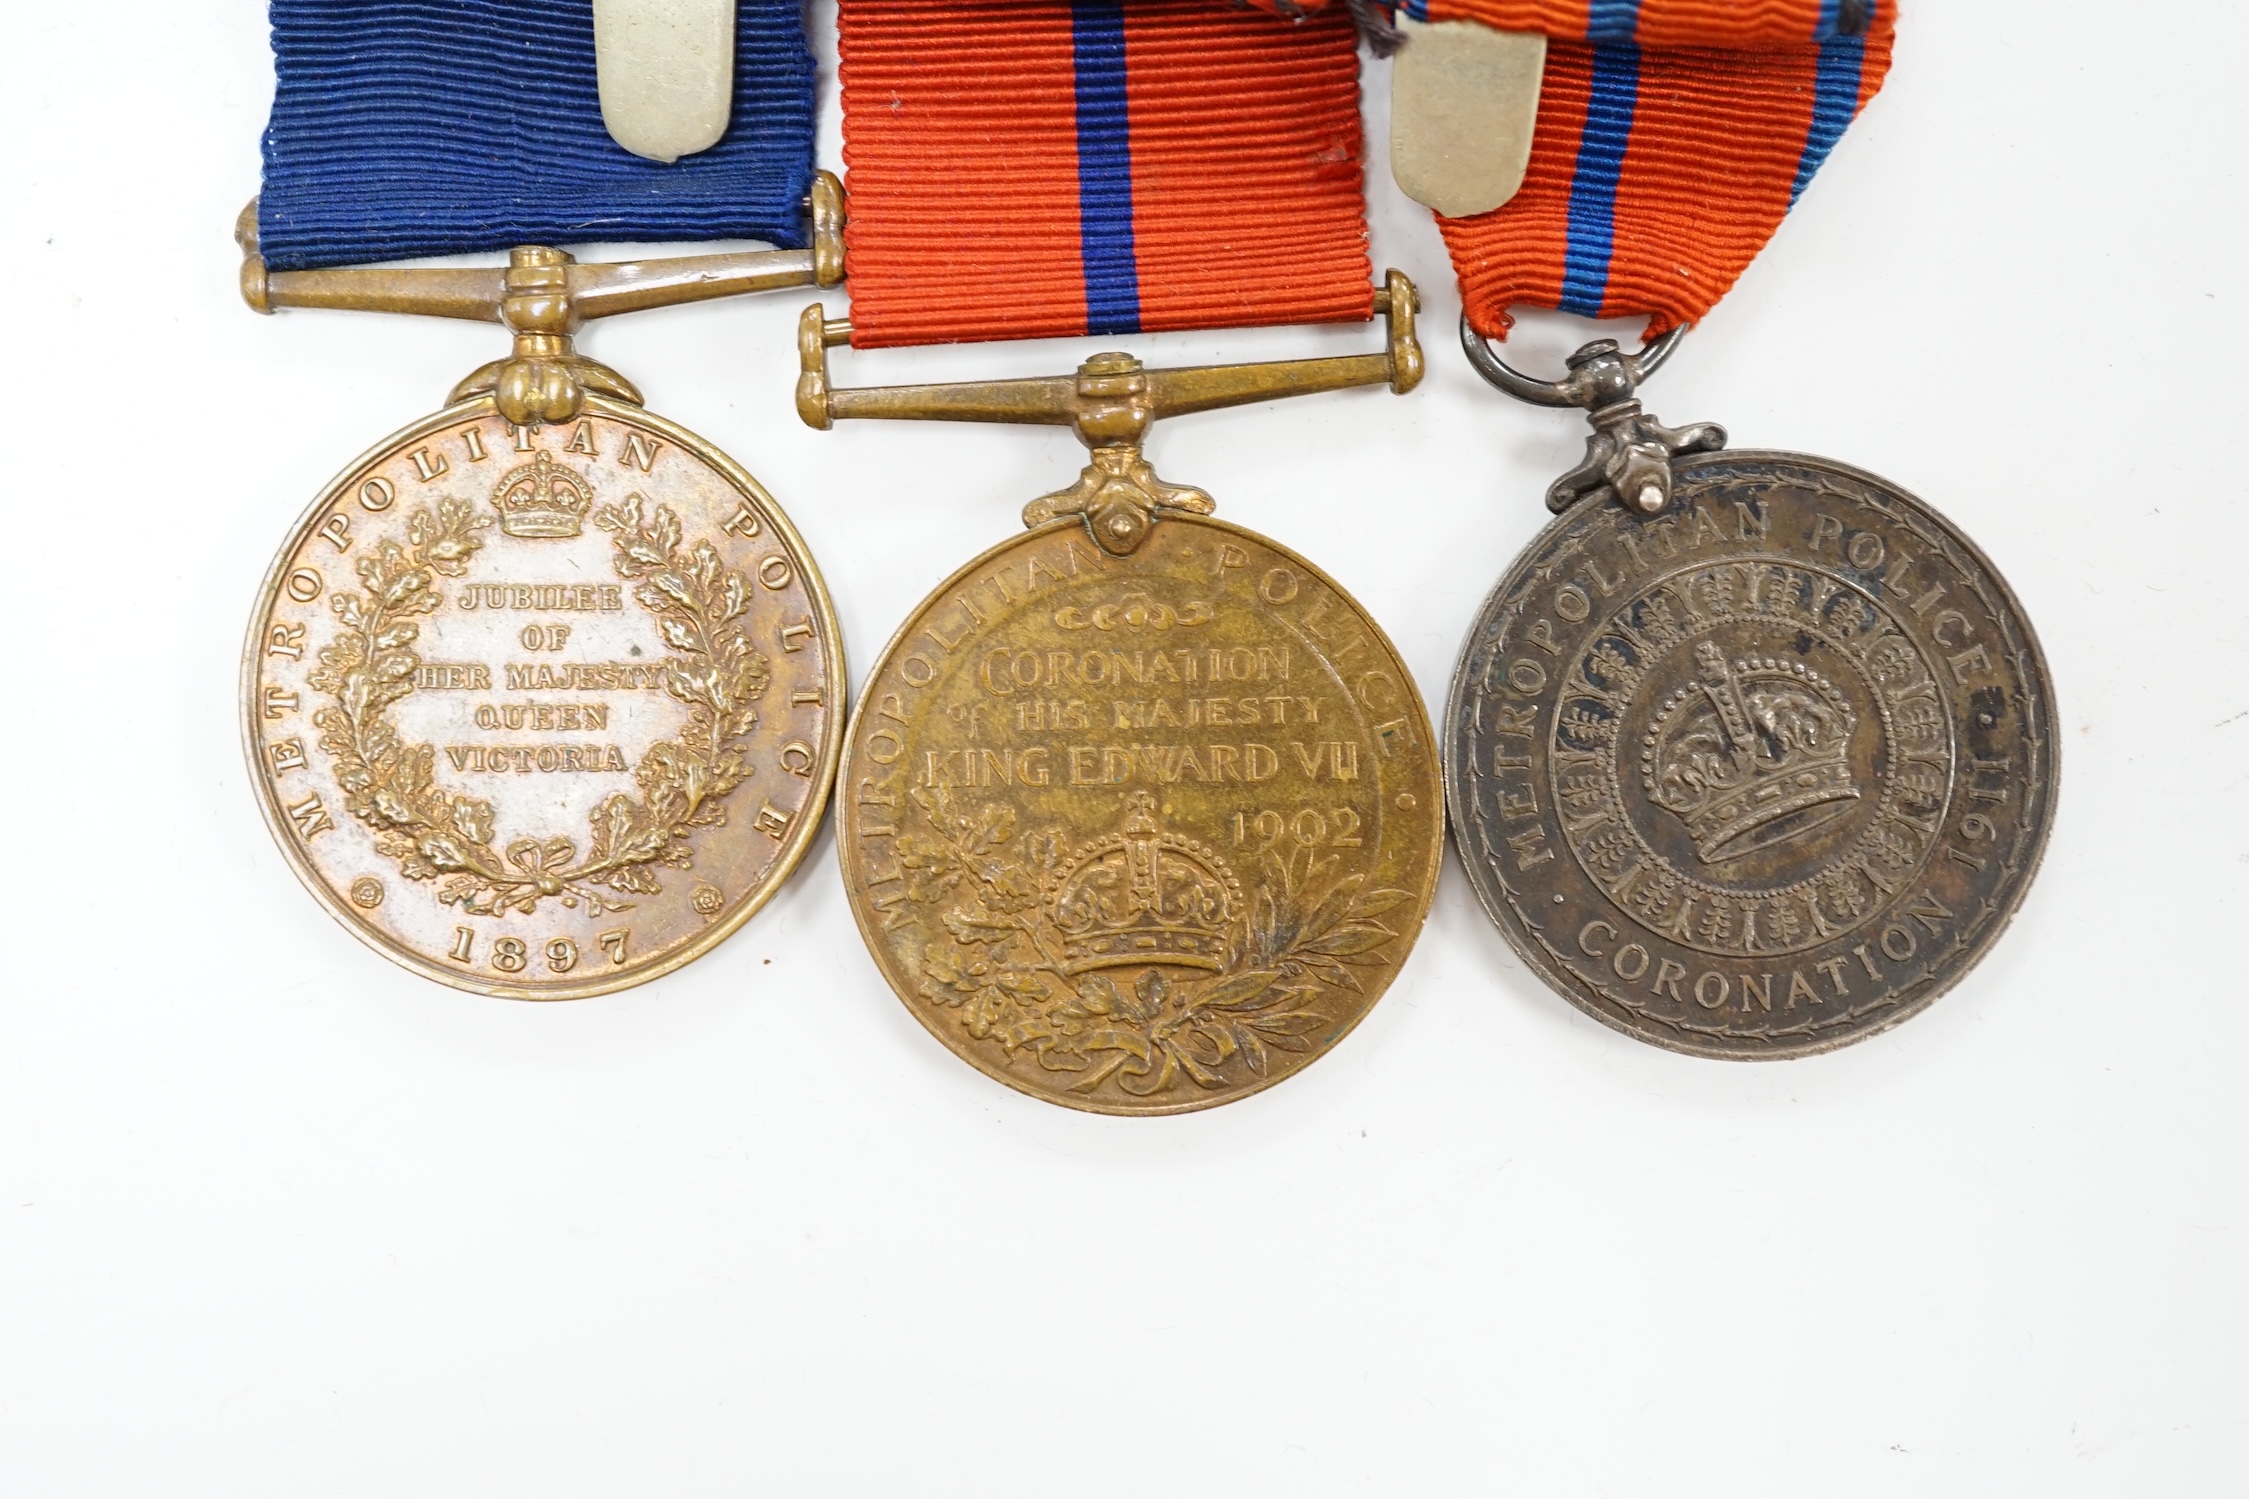 A Metropolitan police medal group awarded to James W. Sidders comprising of three commemorative medals; the 1887 Golden Jubilee medal, the 1902 Edward VII Coronation medal and the 1911 George V Coronation medal, together